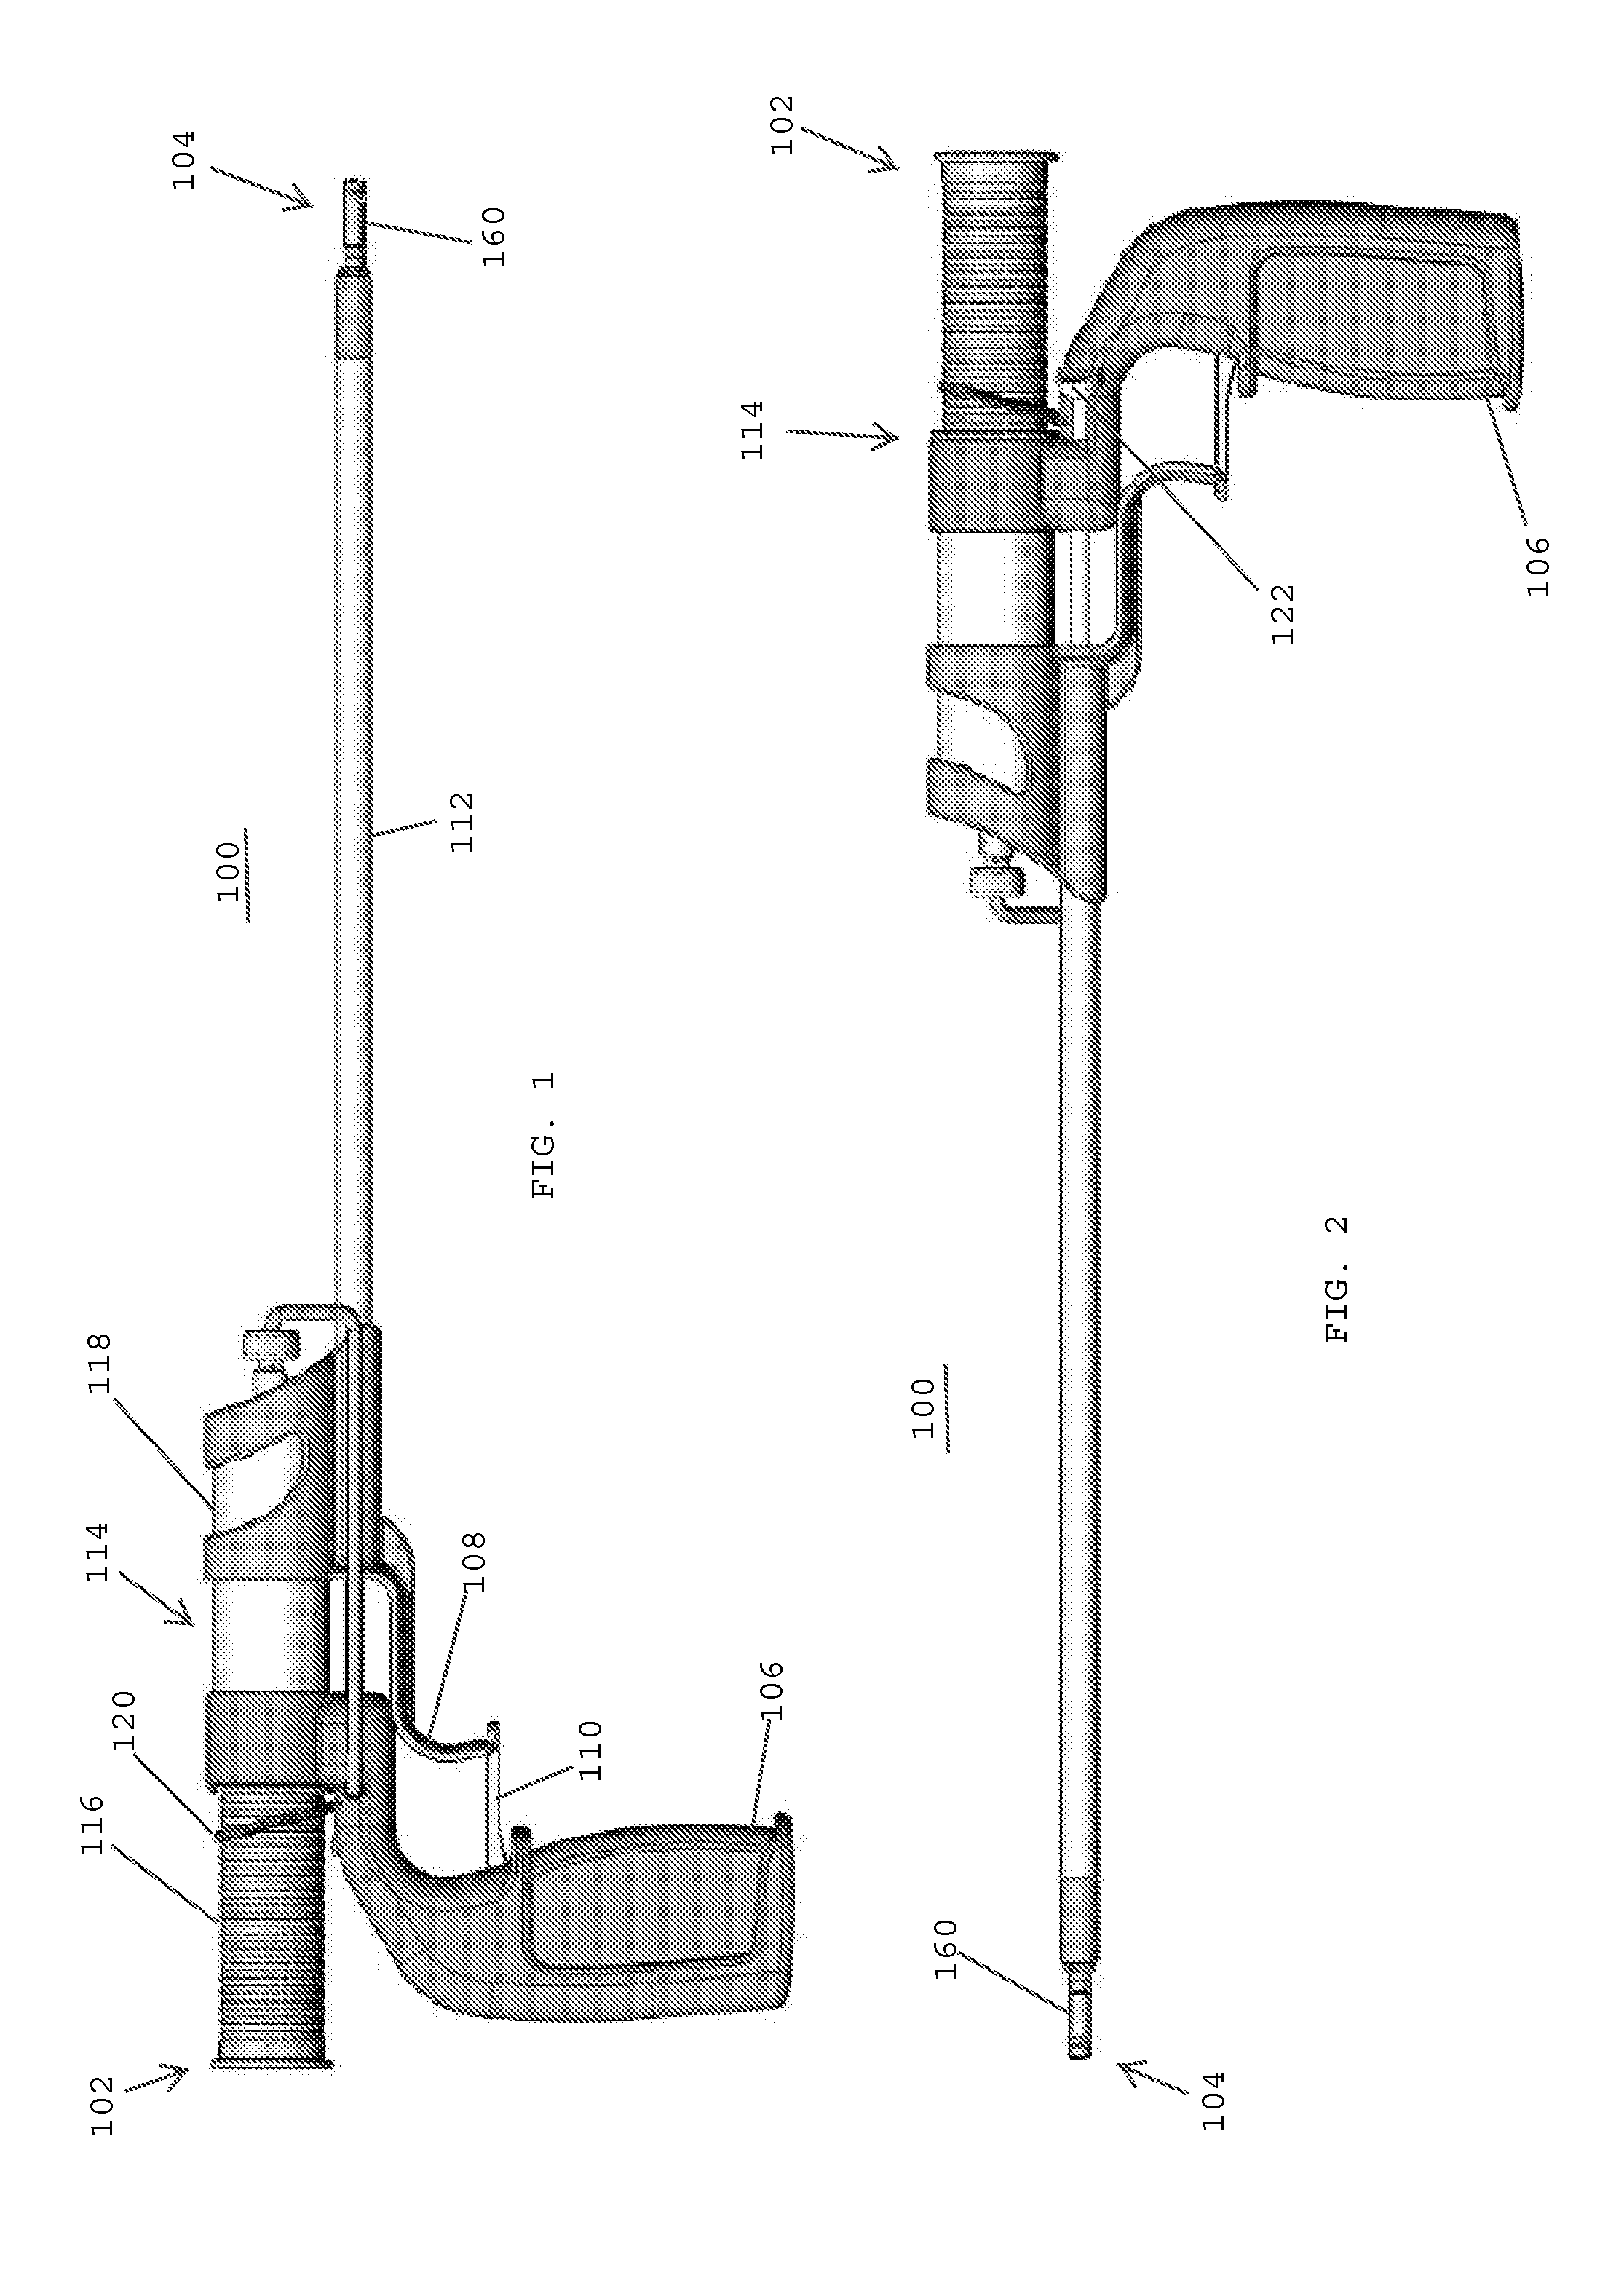 Applicator instruments for the delivery, deployment, and tamponade of hemostats and methods therefor